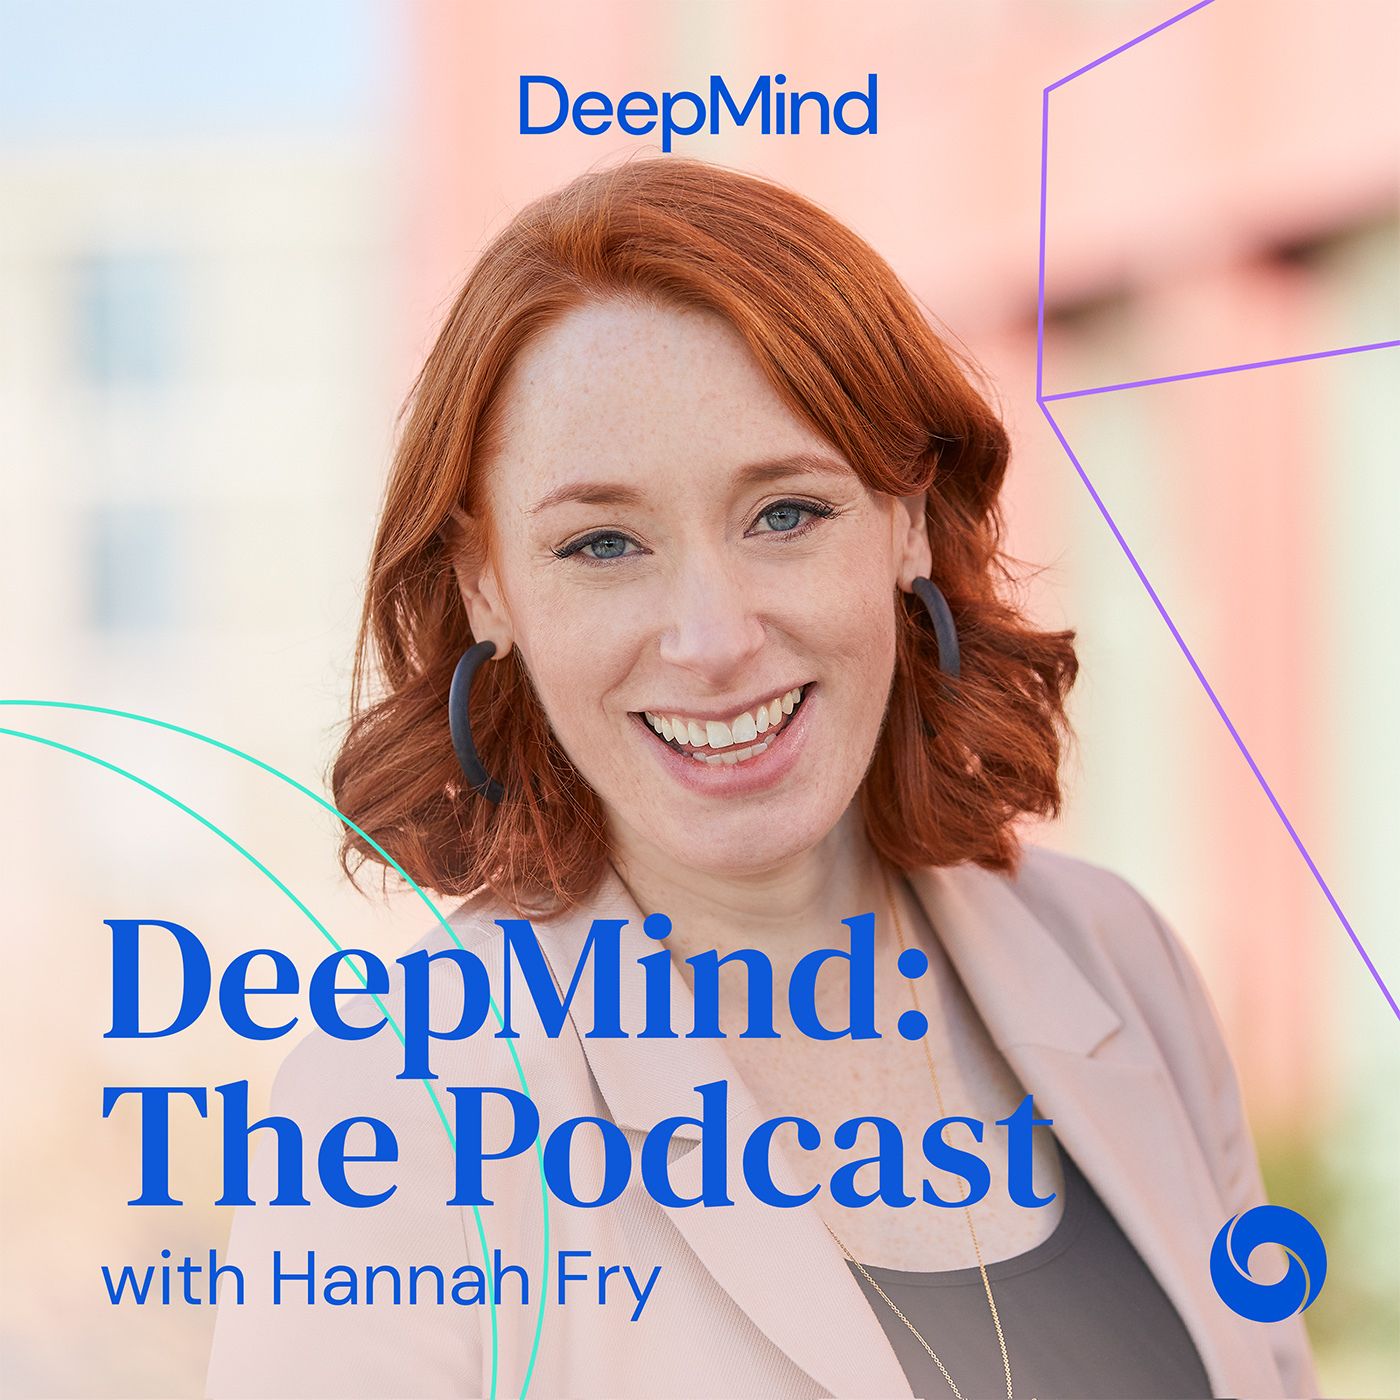 S1 Ep1: DeepMind: The Podcast - trailer